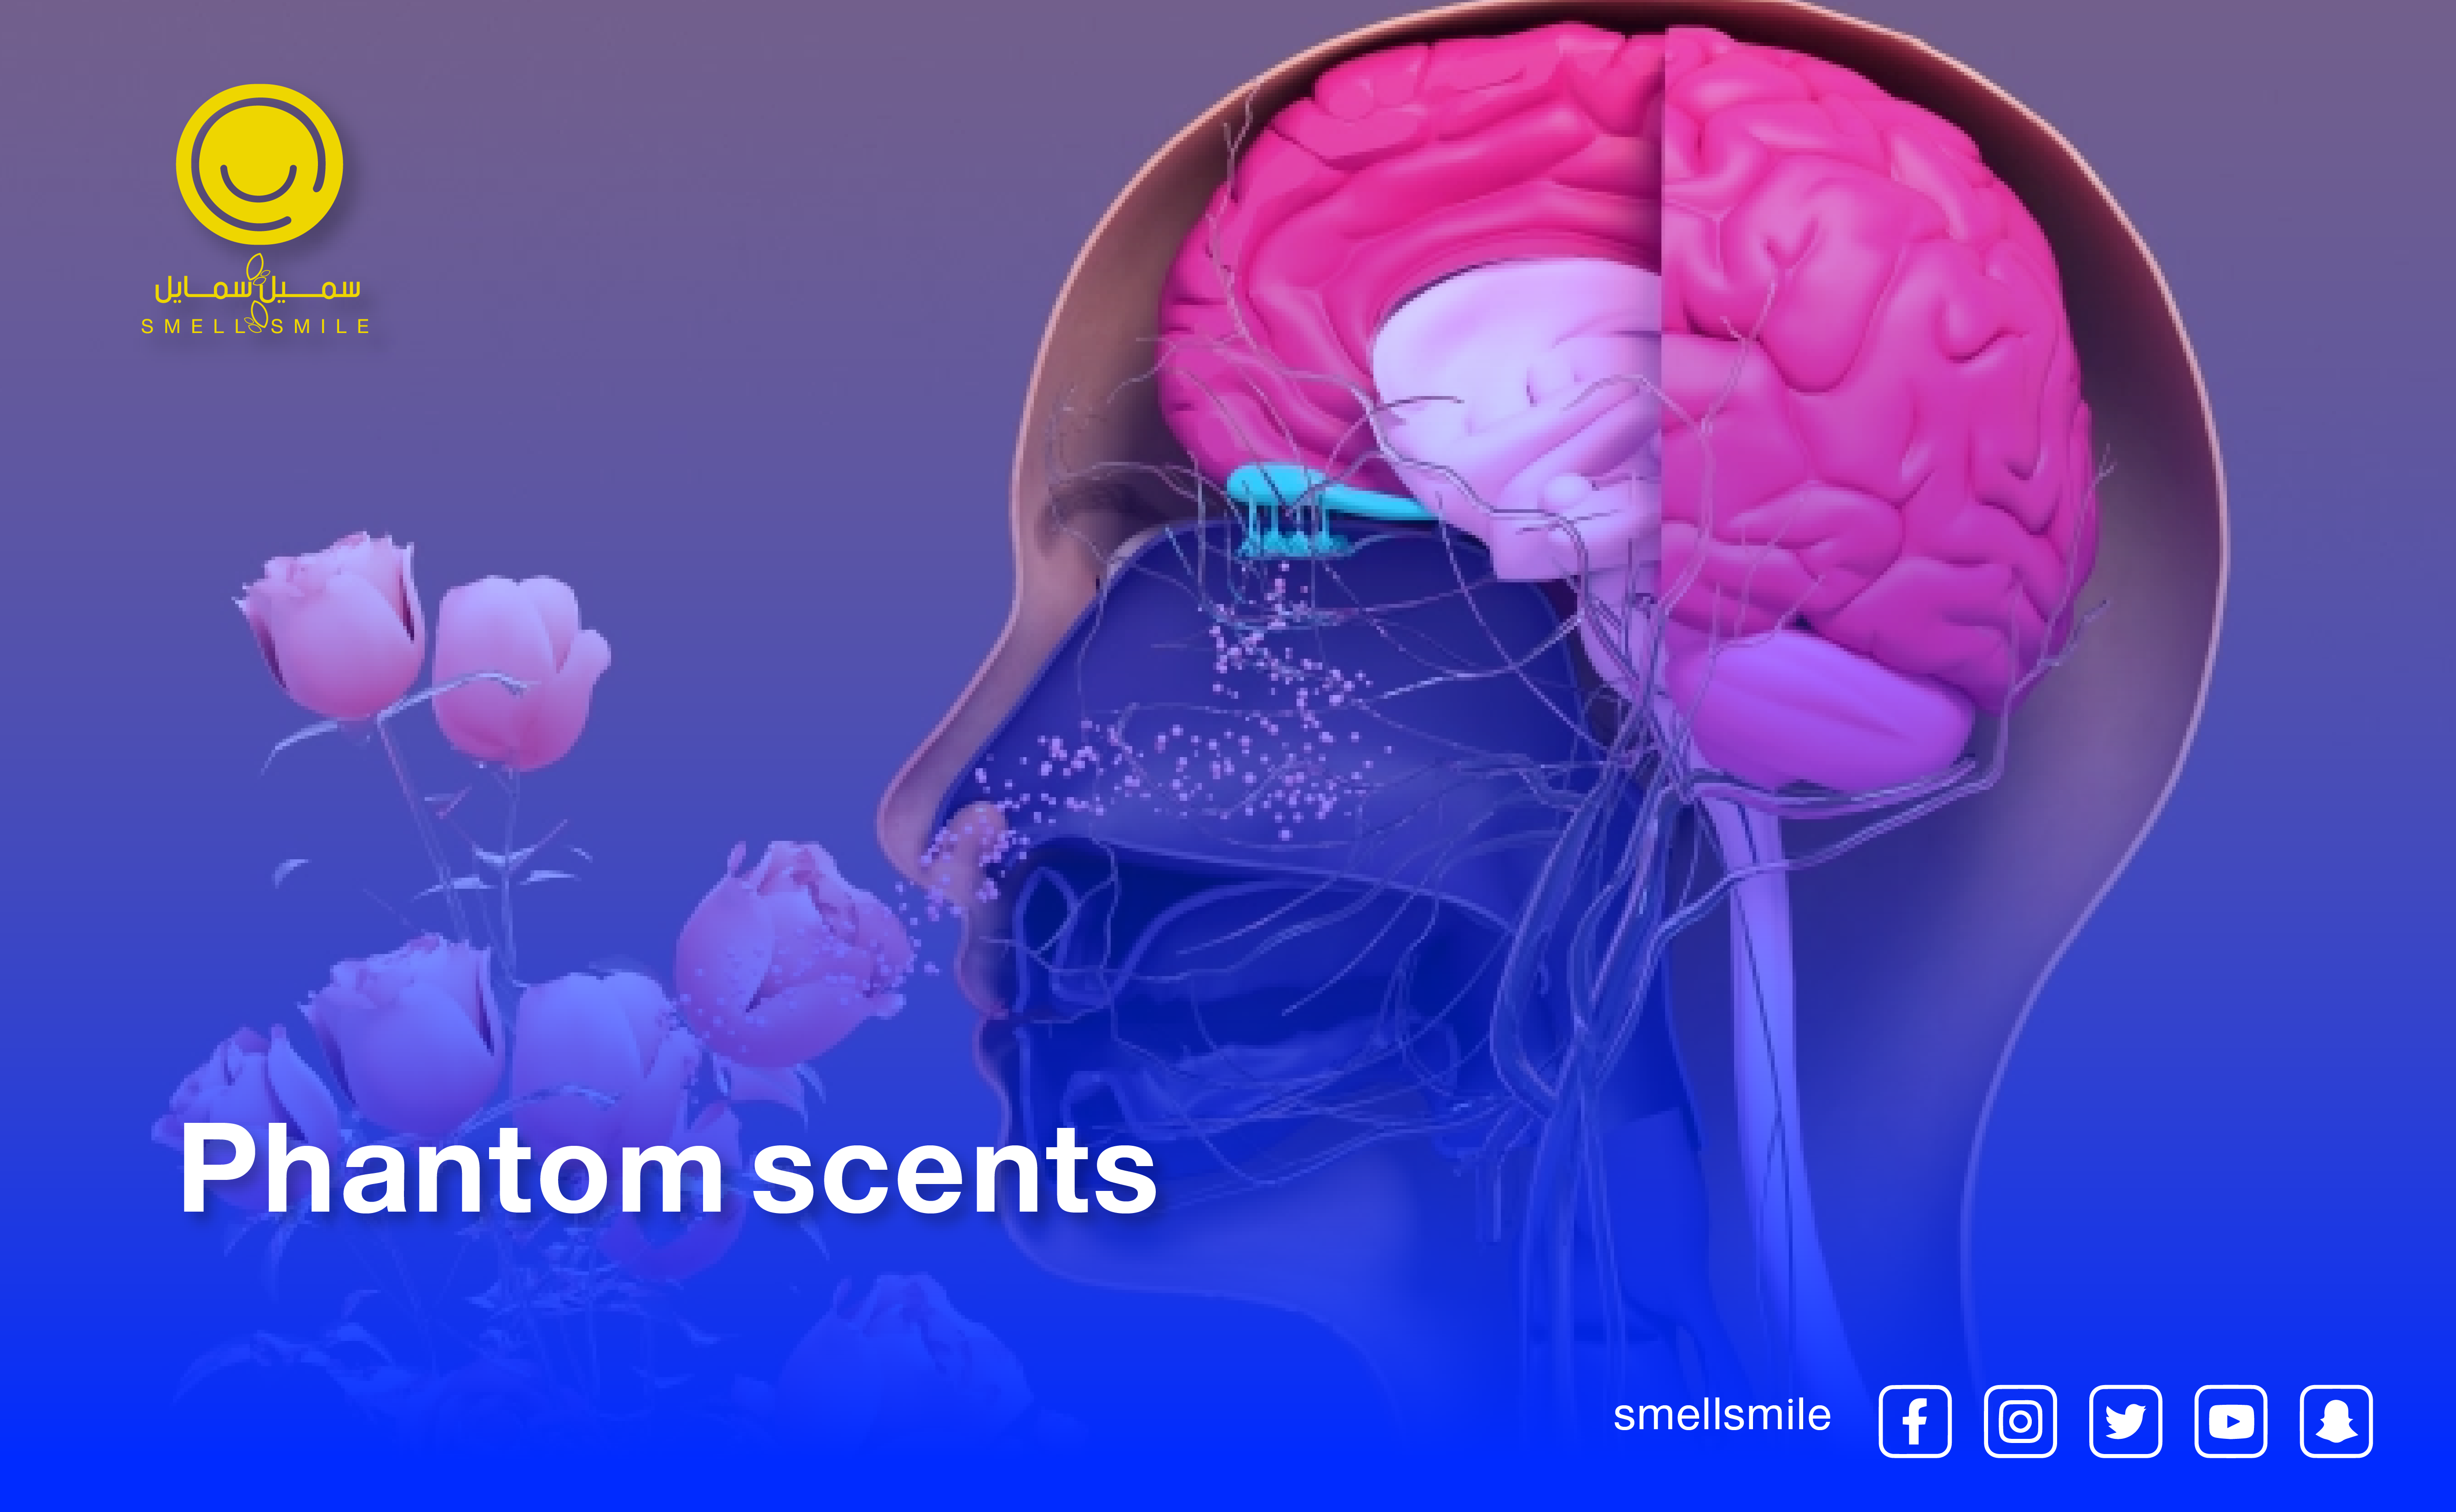 Olfactory hallucinations and delusions of smell